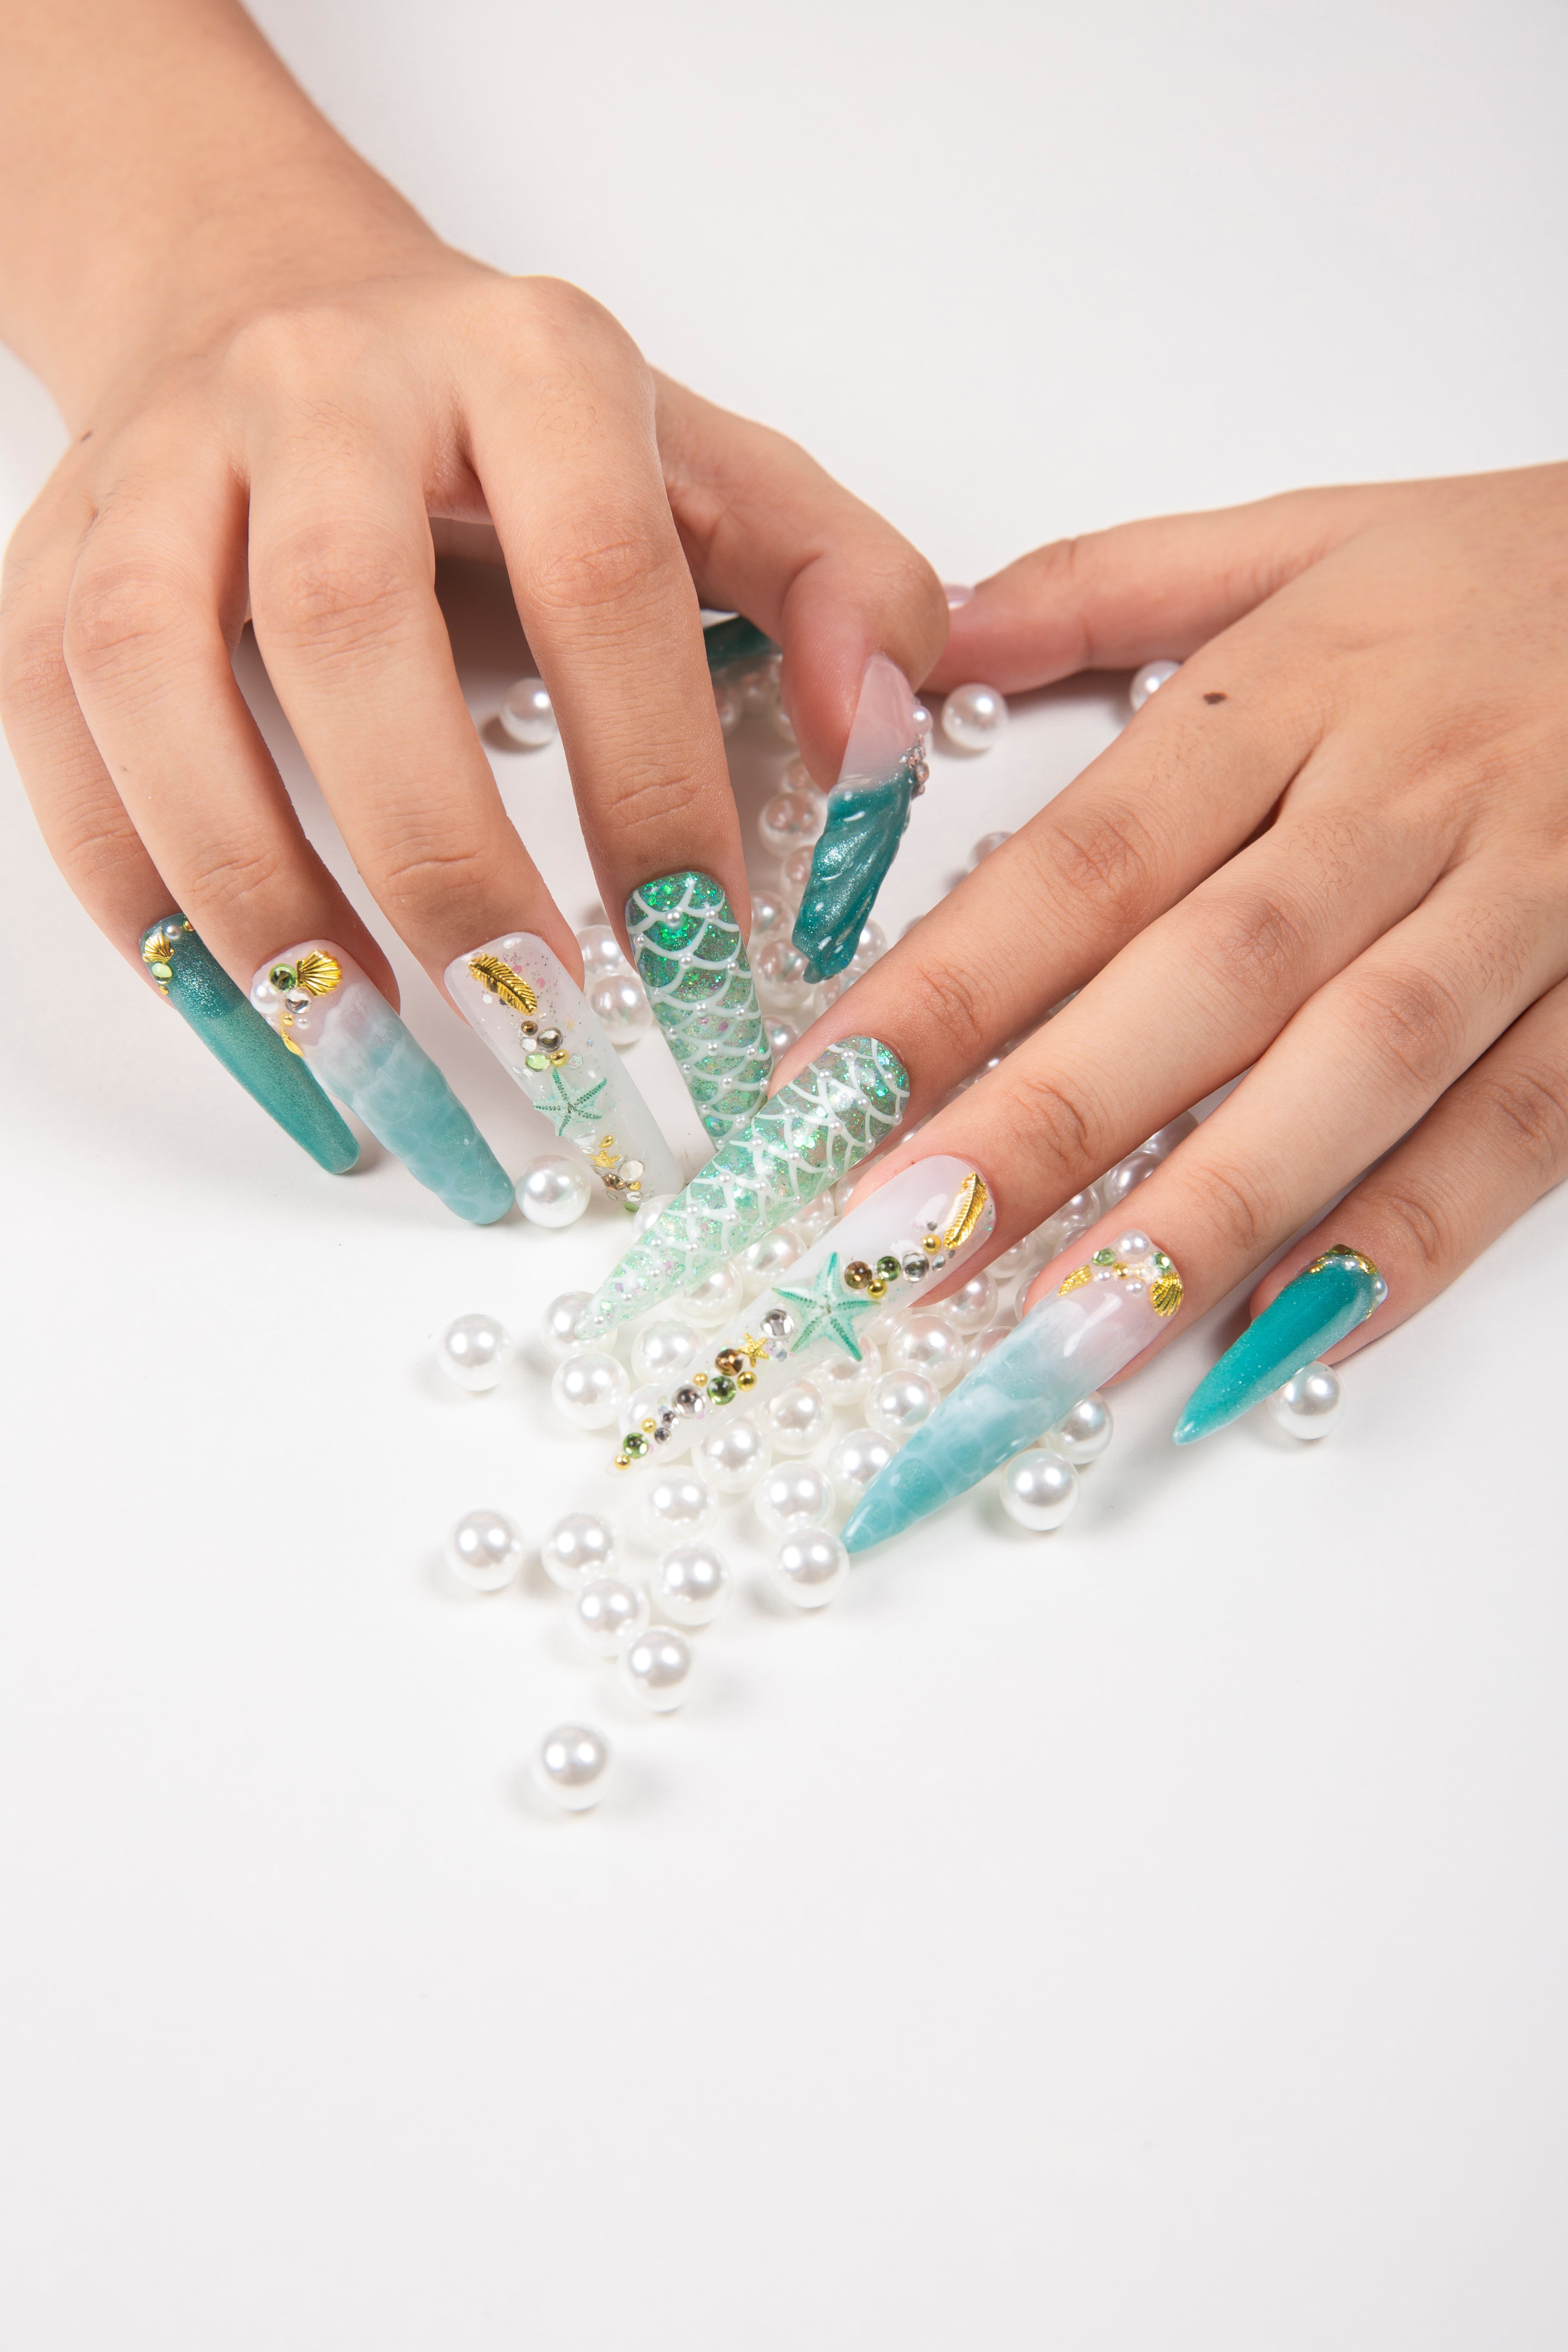 Hands with long press-on nails in Hawaii sea blue theme adorned with starfish, glitter, and intricate designs. Nails are displayed with scattered white pearls, creating a joyful beach vibe.